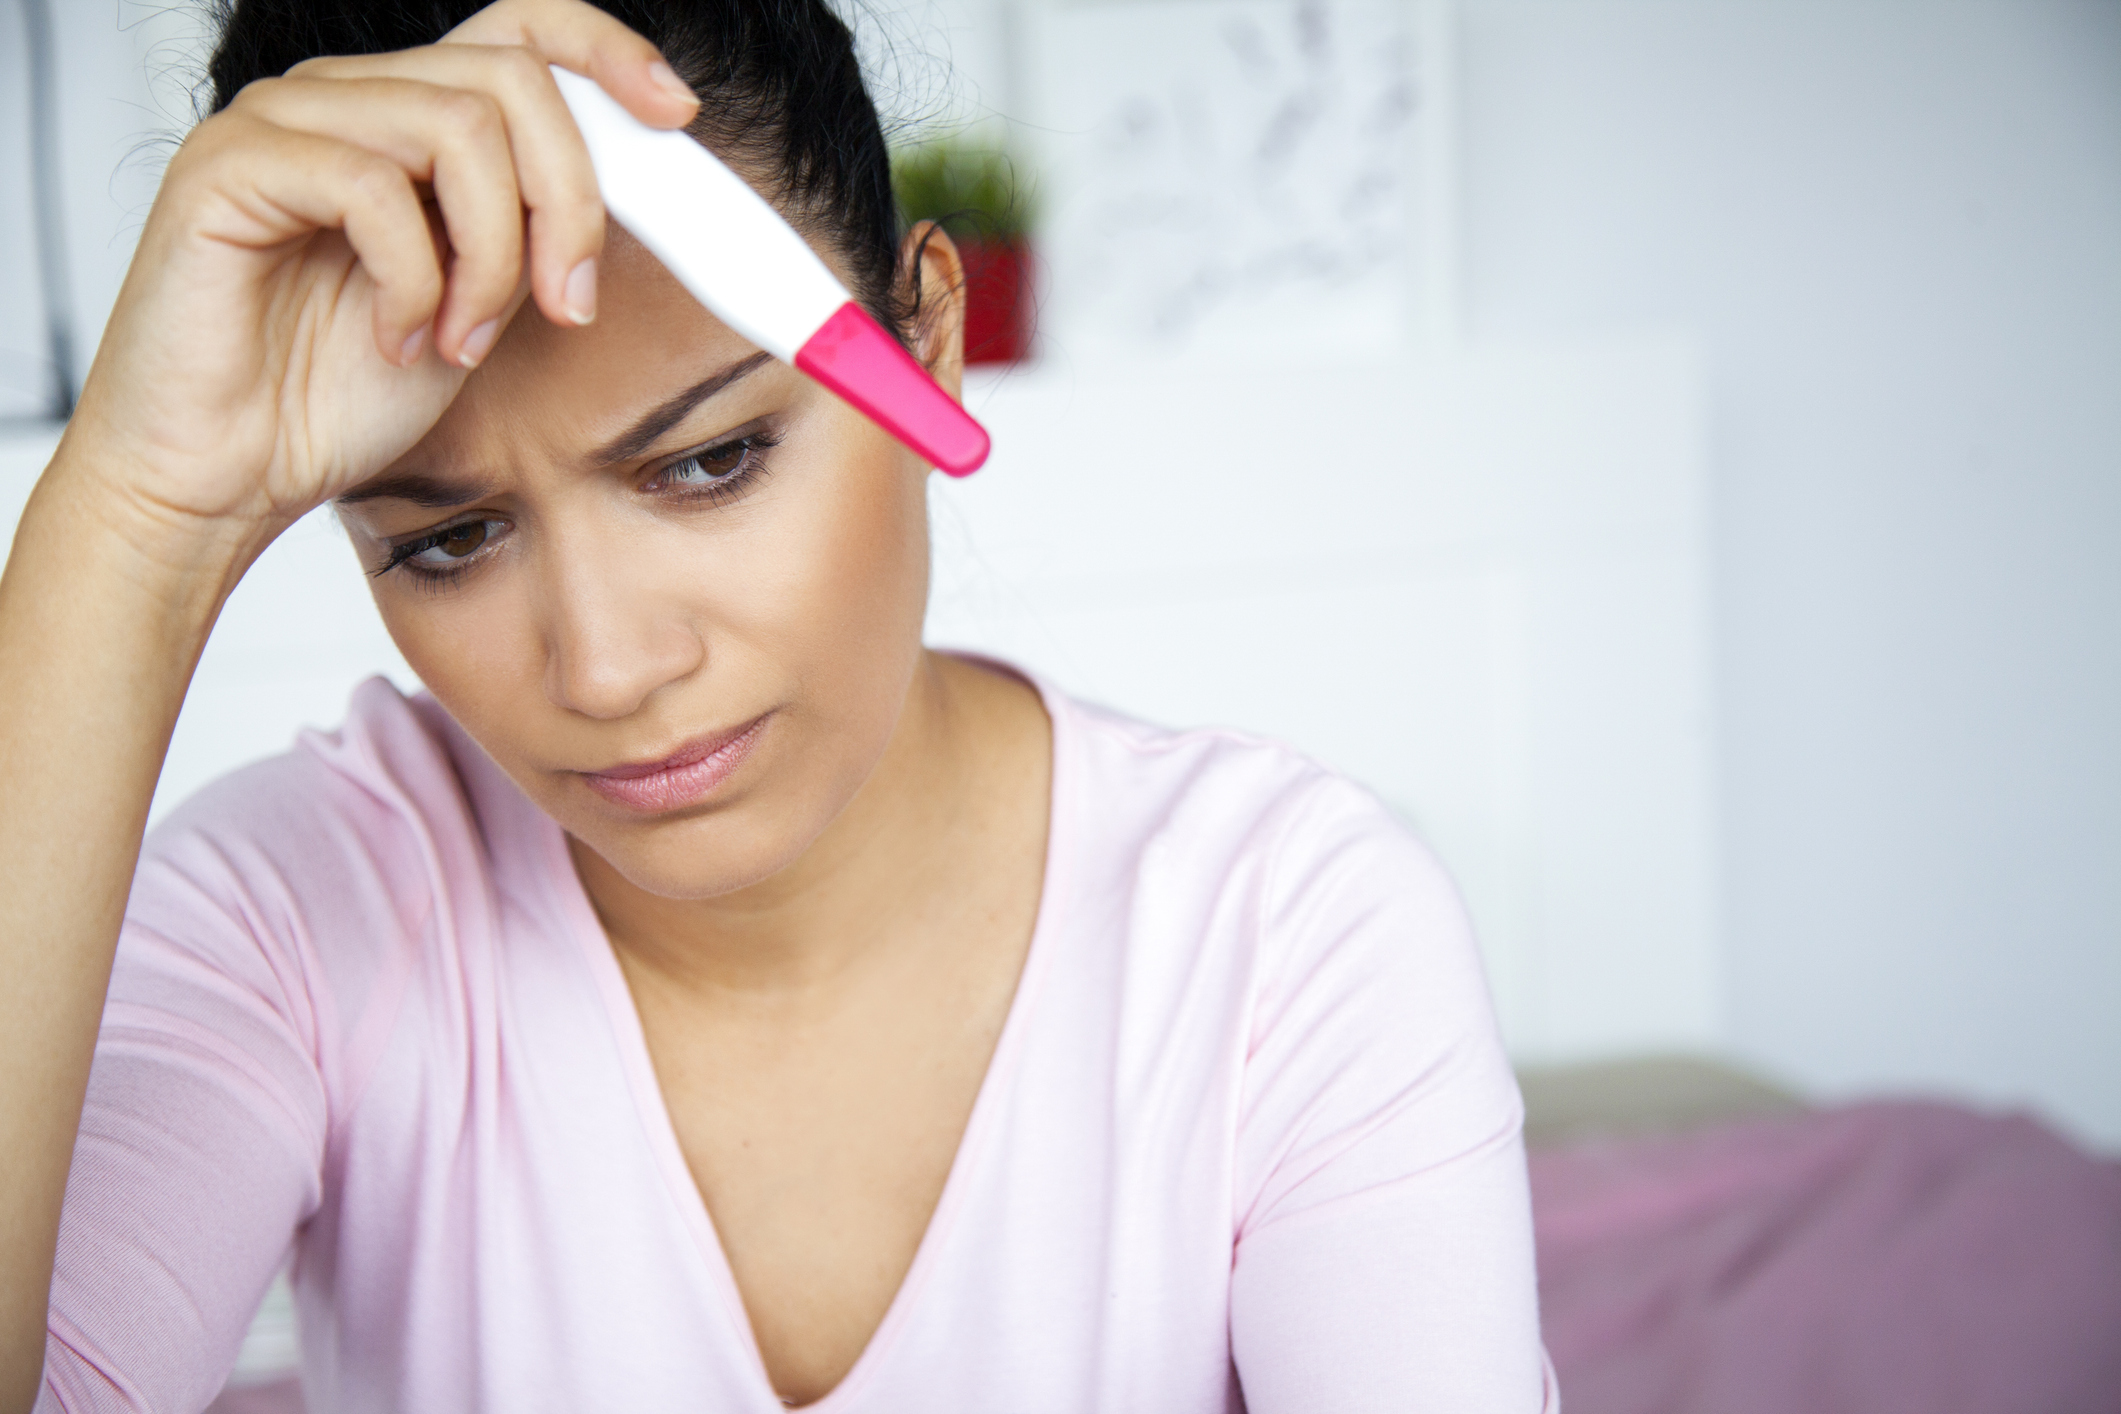 The Leading Causes of Female Infertility